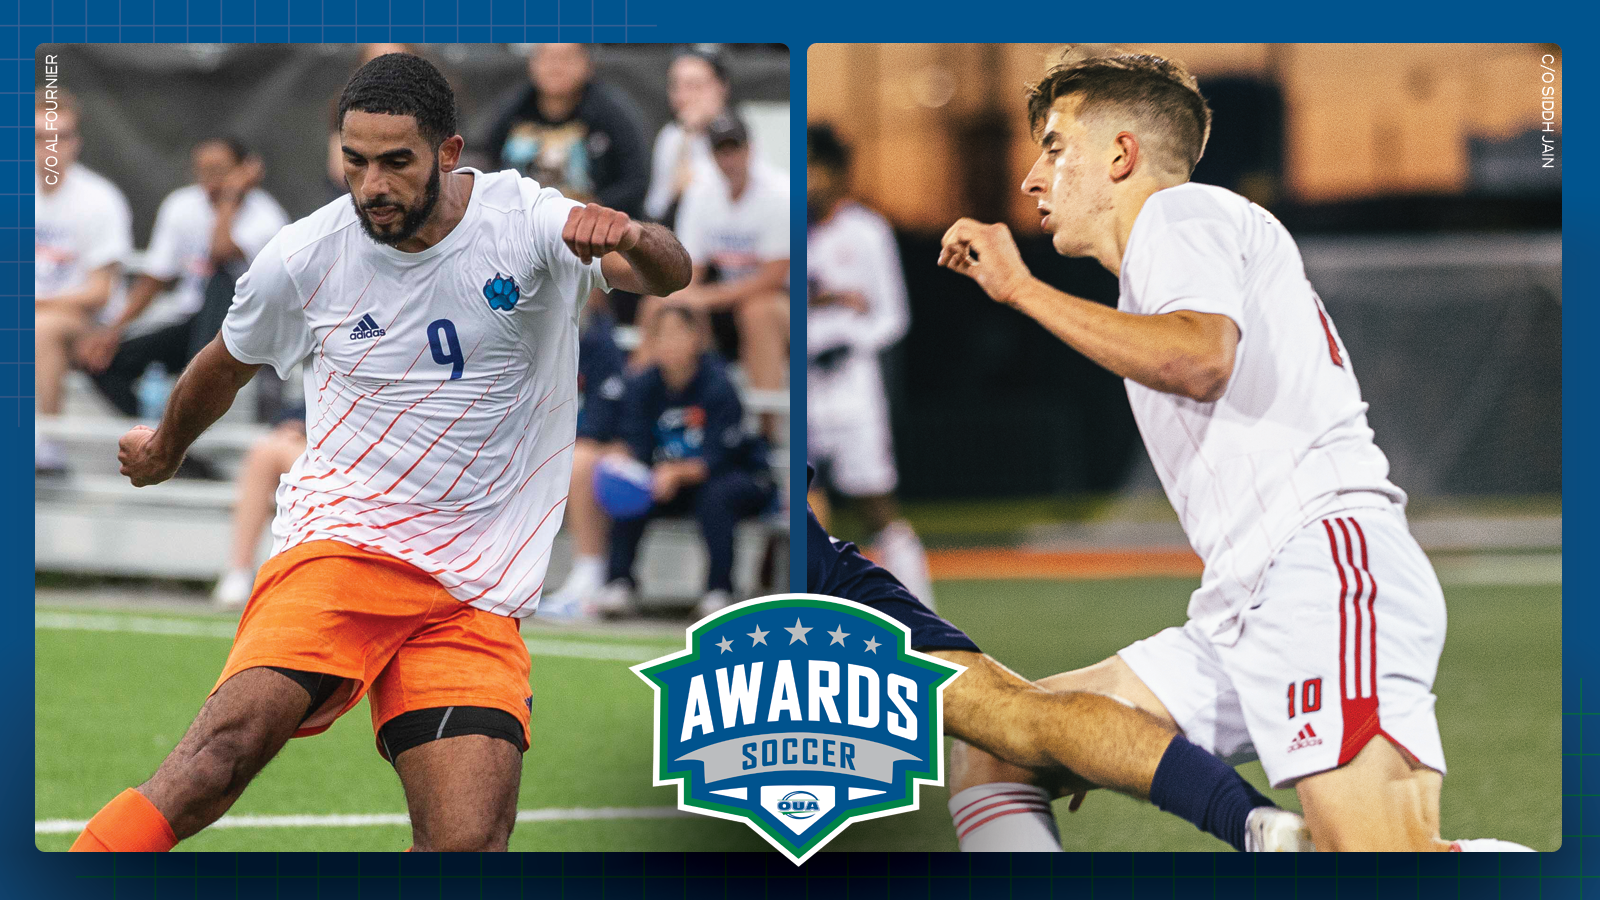 Graphic on predominantly blue background featuring photos Ontario Tech men?s soccer player Omar Marzouk and York men?s soccer player Christian Zeppieri, and the OUA soccer awards logo centered in the lower third